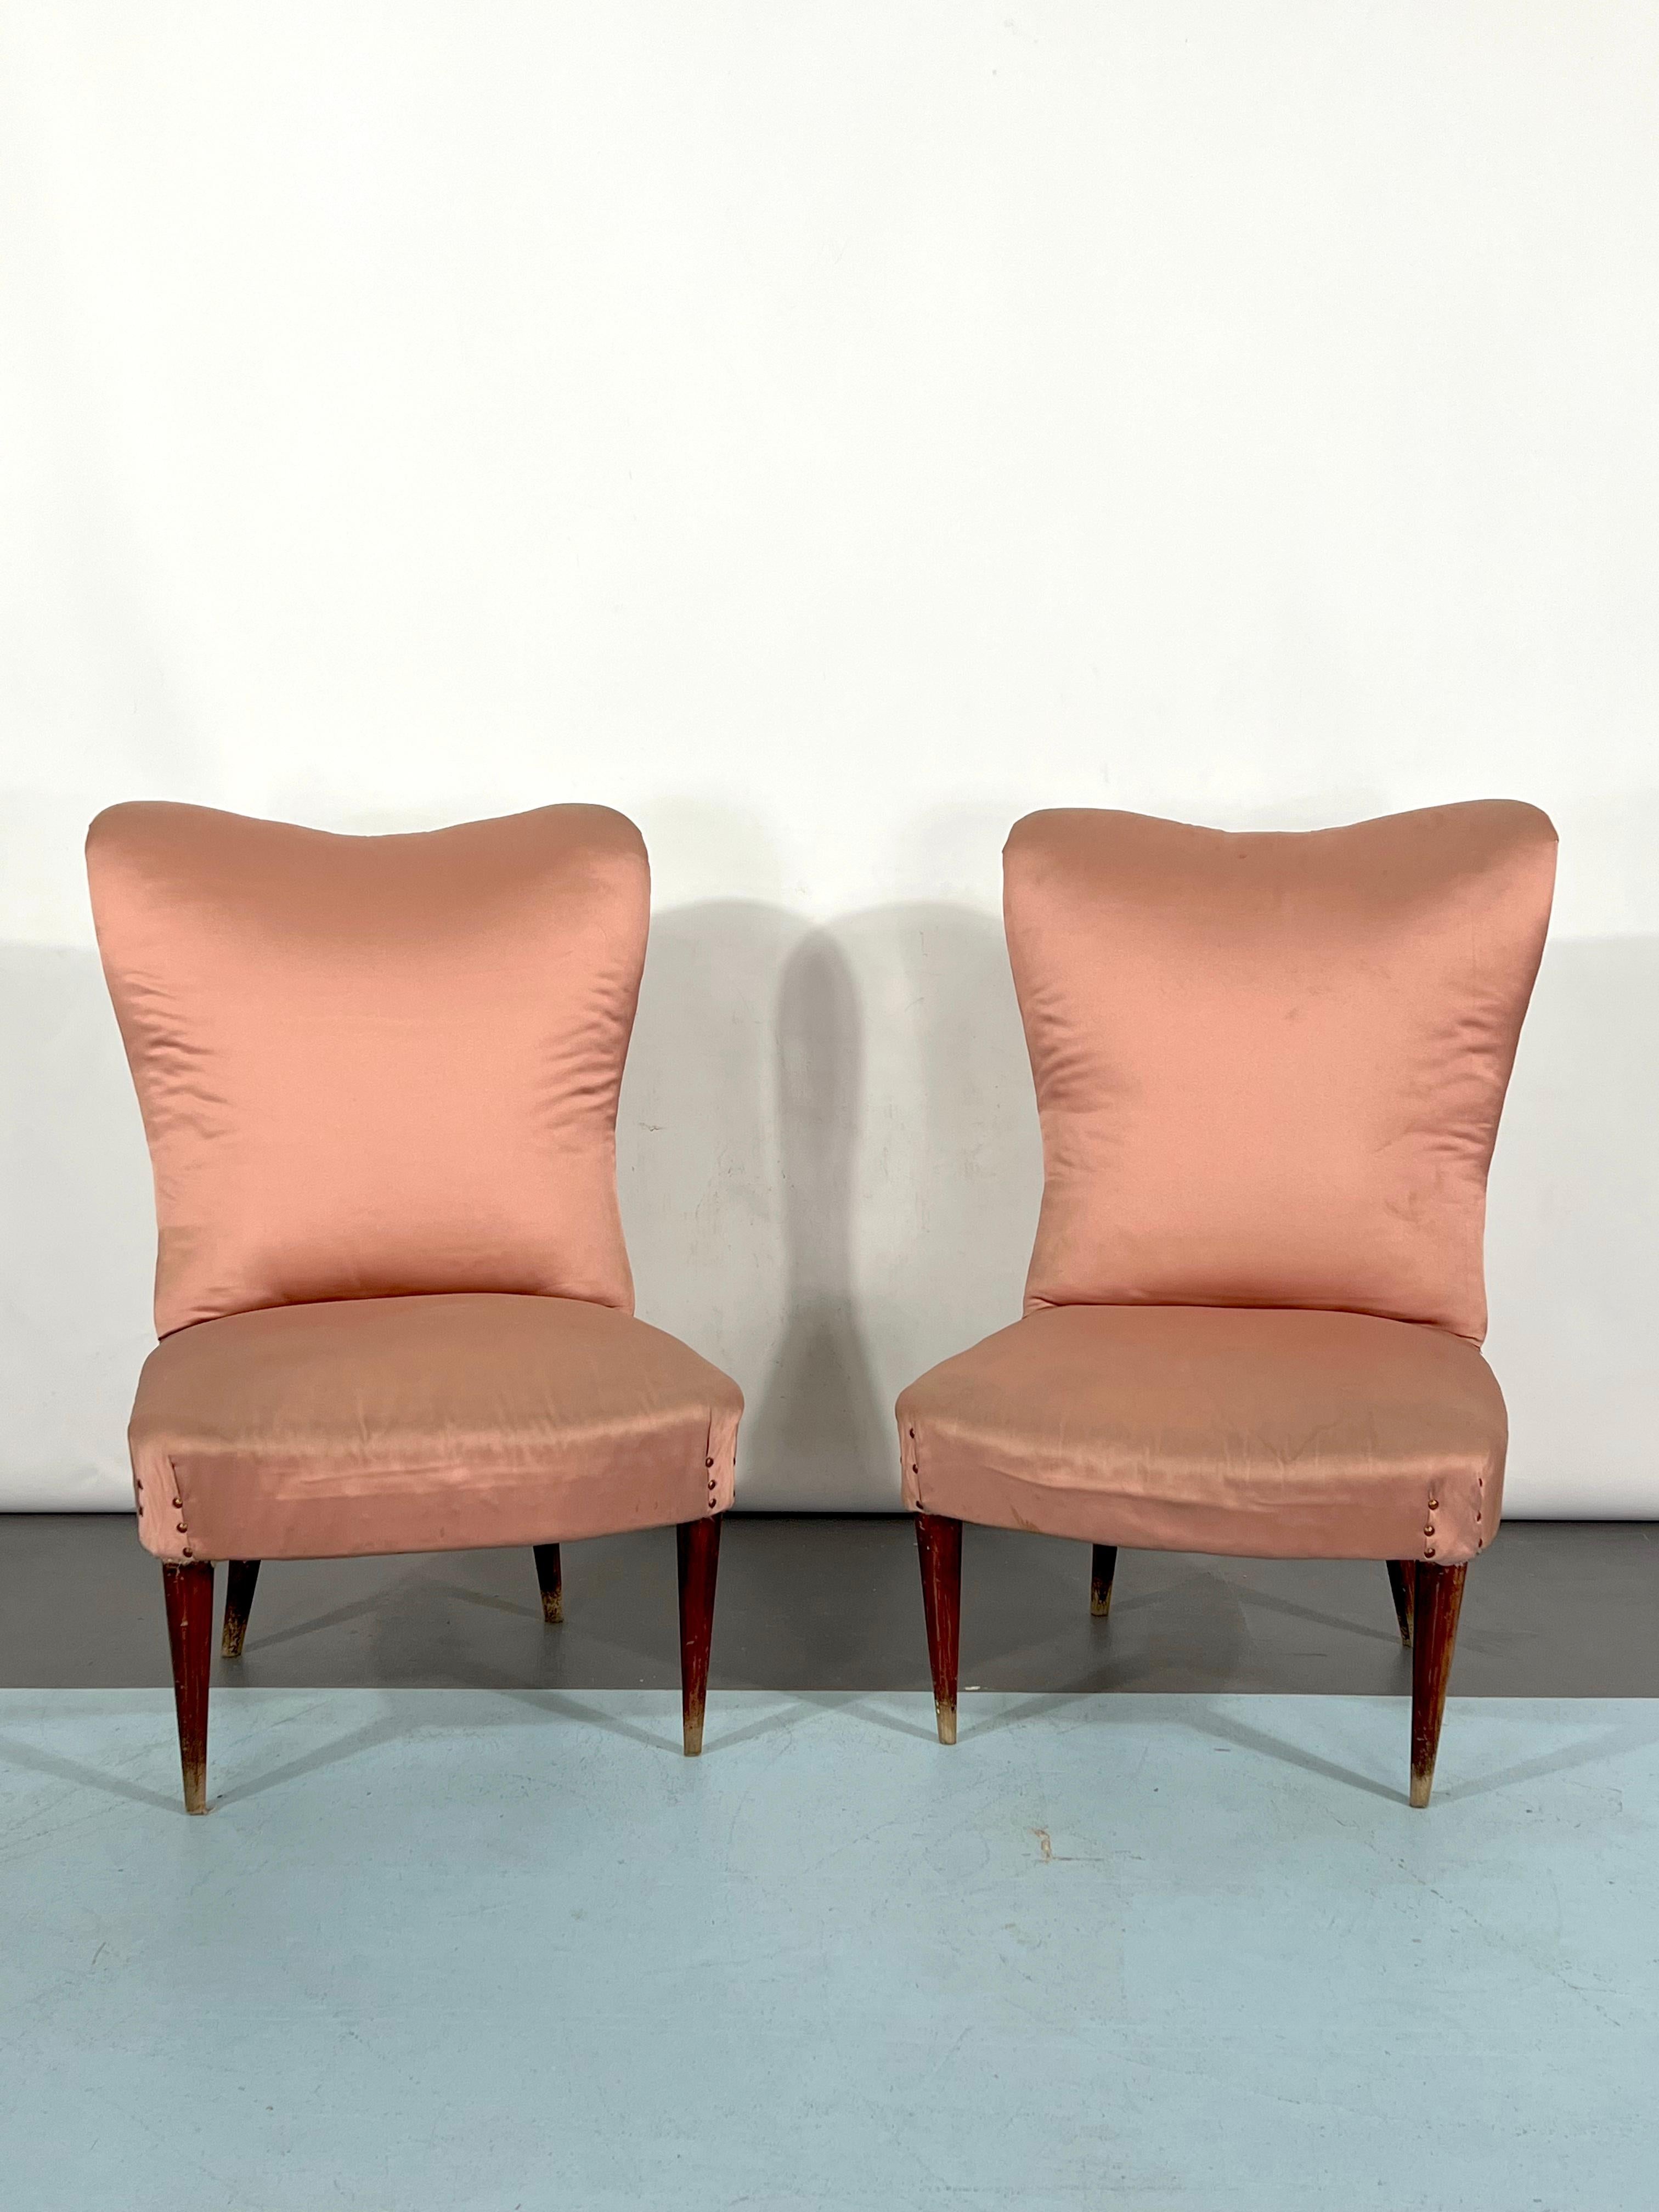 Original vintage condition with trace of age and use for this set of two armchairs reminiscent of Gio Ponti style. Fabric with small defects.